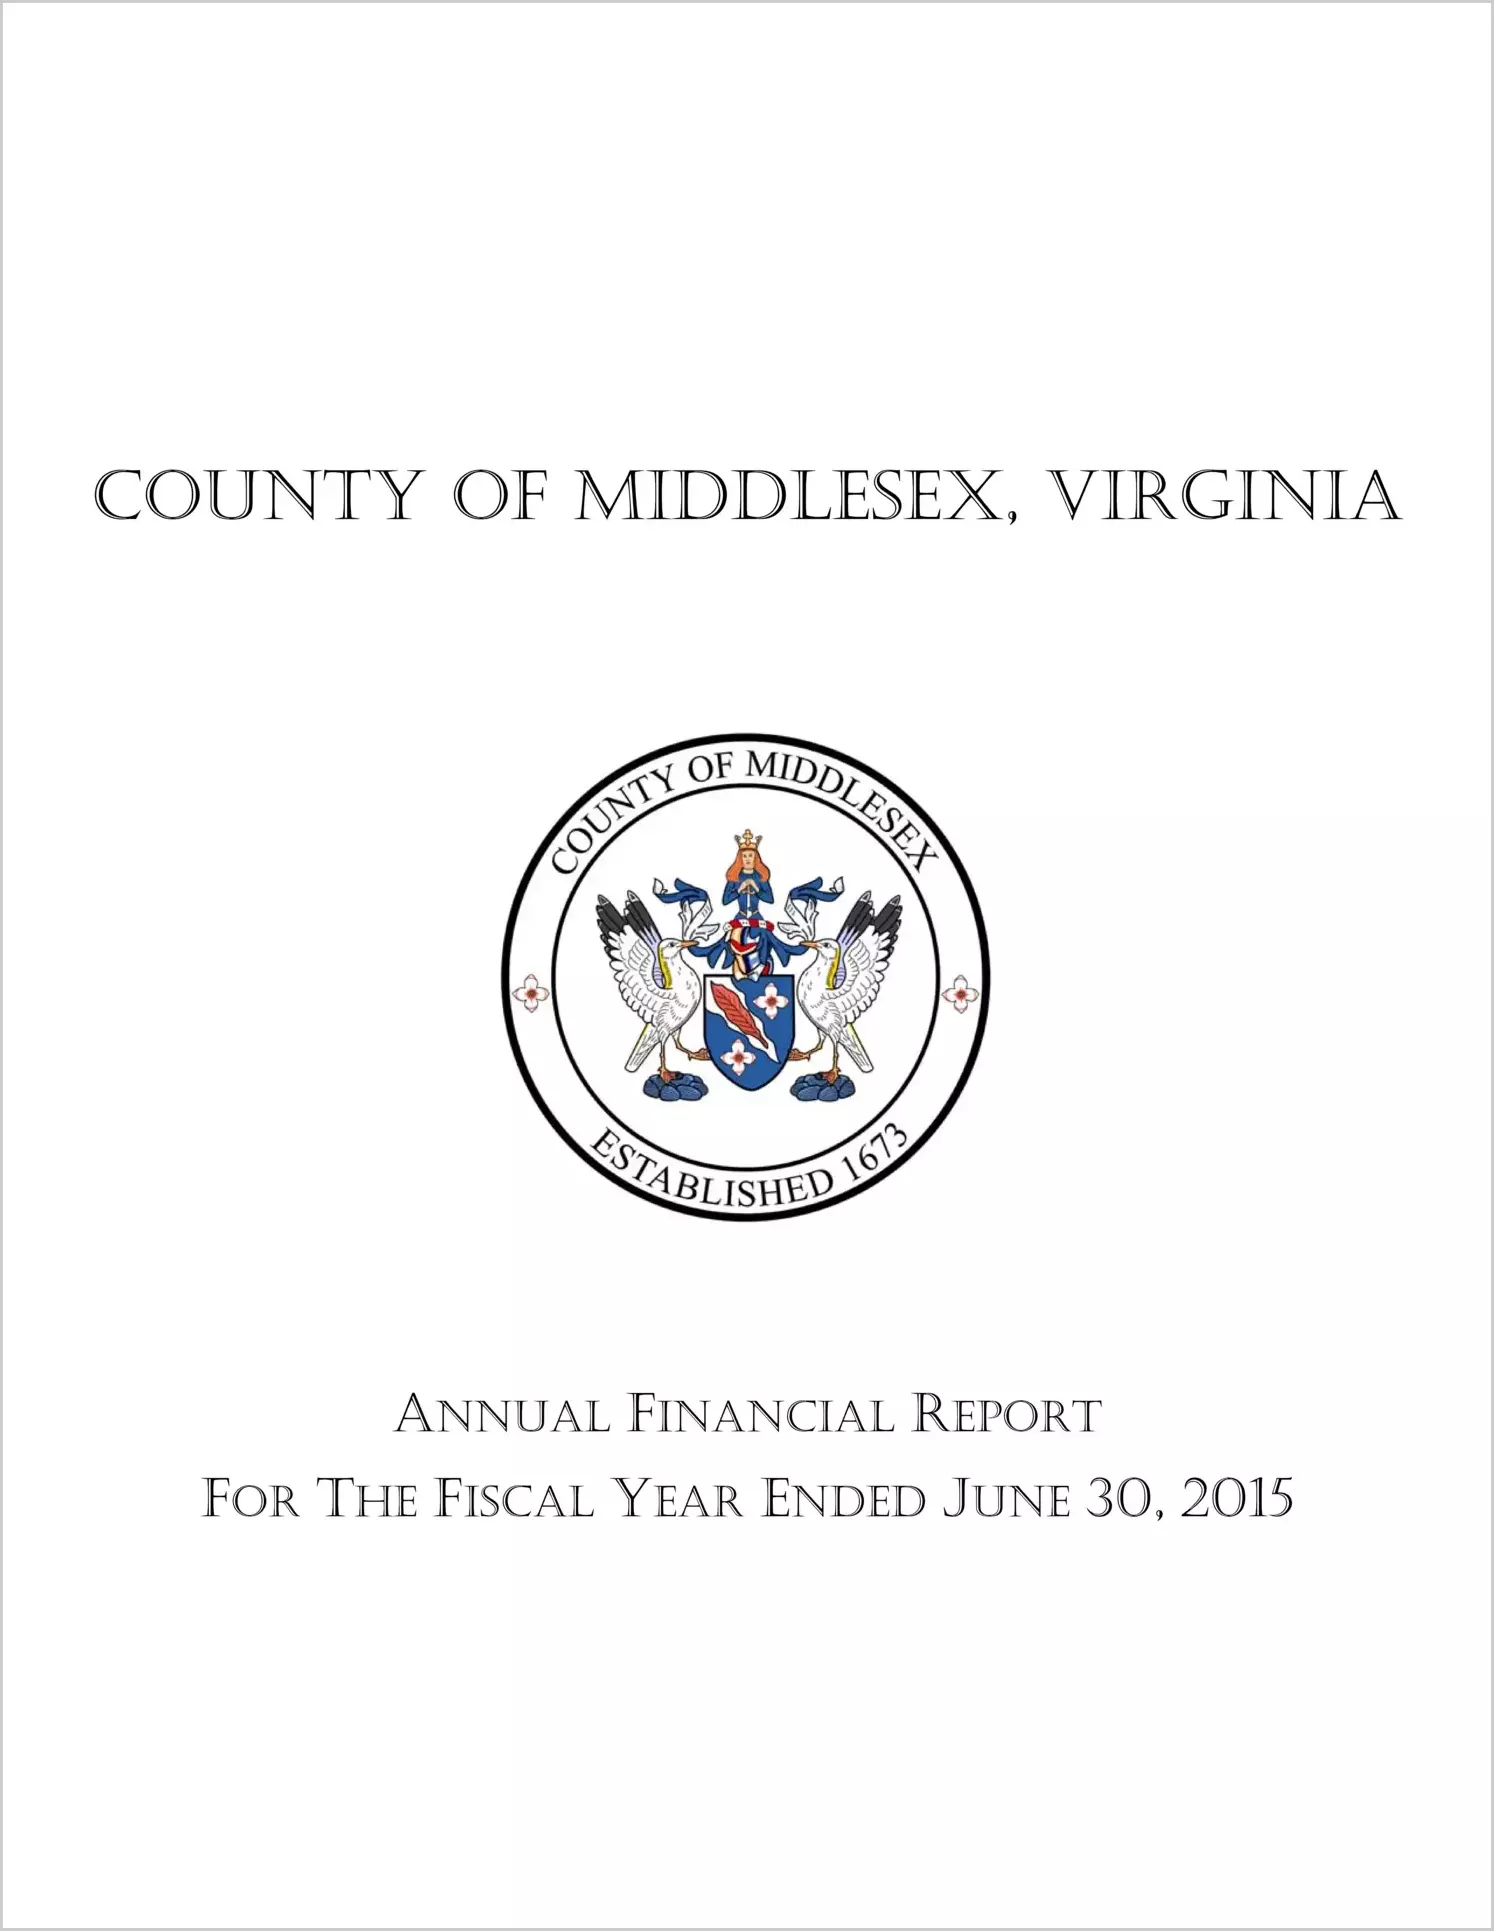 2015 Annual Financial Report for County of Middlesex